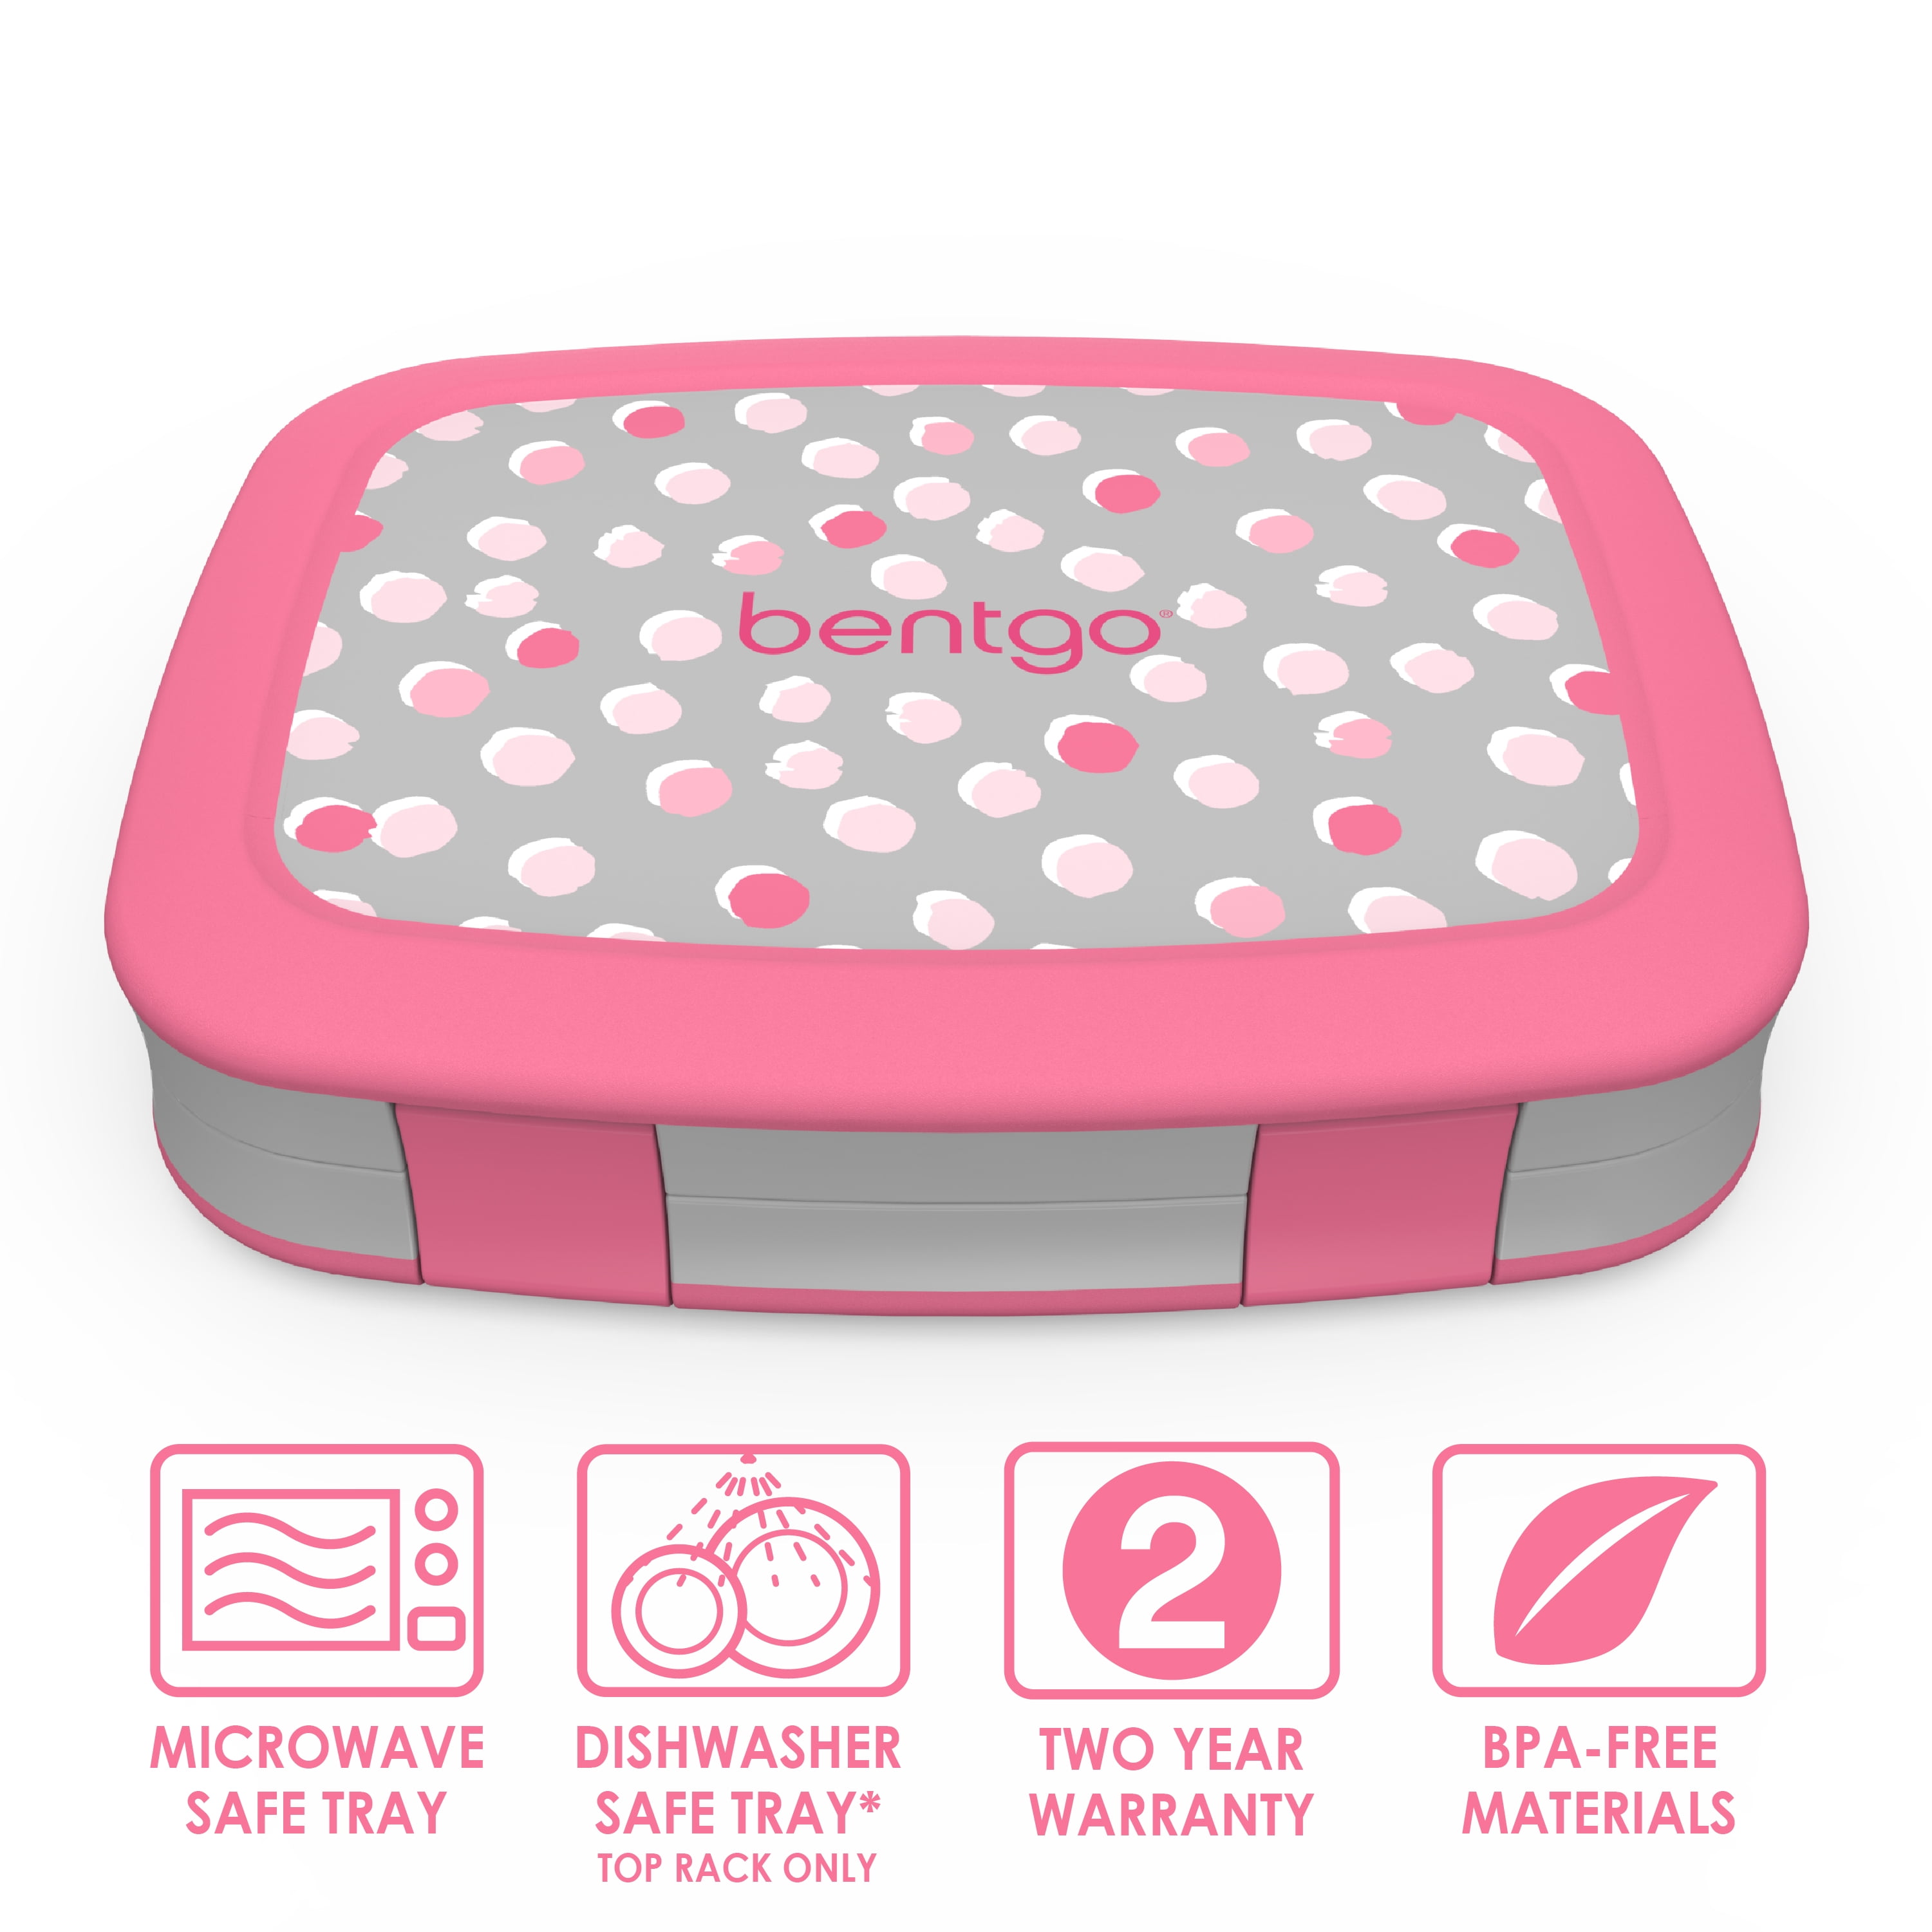  Howeemo Kids Leak-Proof Bento Lunch Box with 4 Compartments  Removable Tritan Tray, Lunch Containers for Kids to School, BPA-Free,  Dishwasher Safe, Food-Safe Materials,Pink-Mermaid: Home & Kitchen